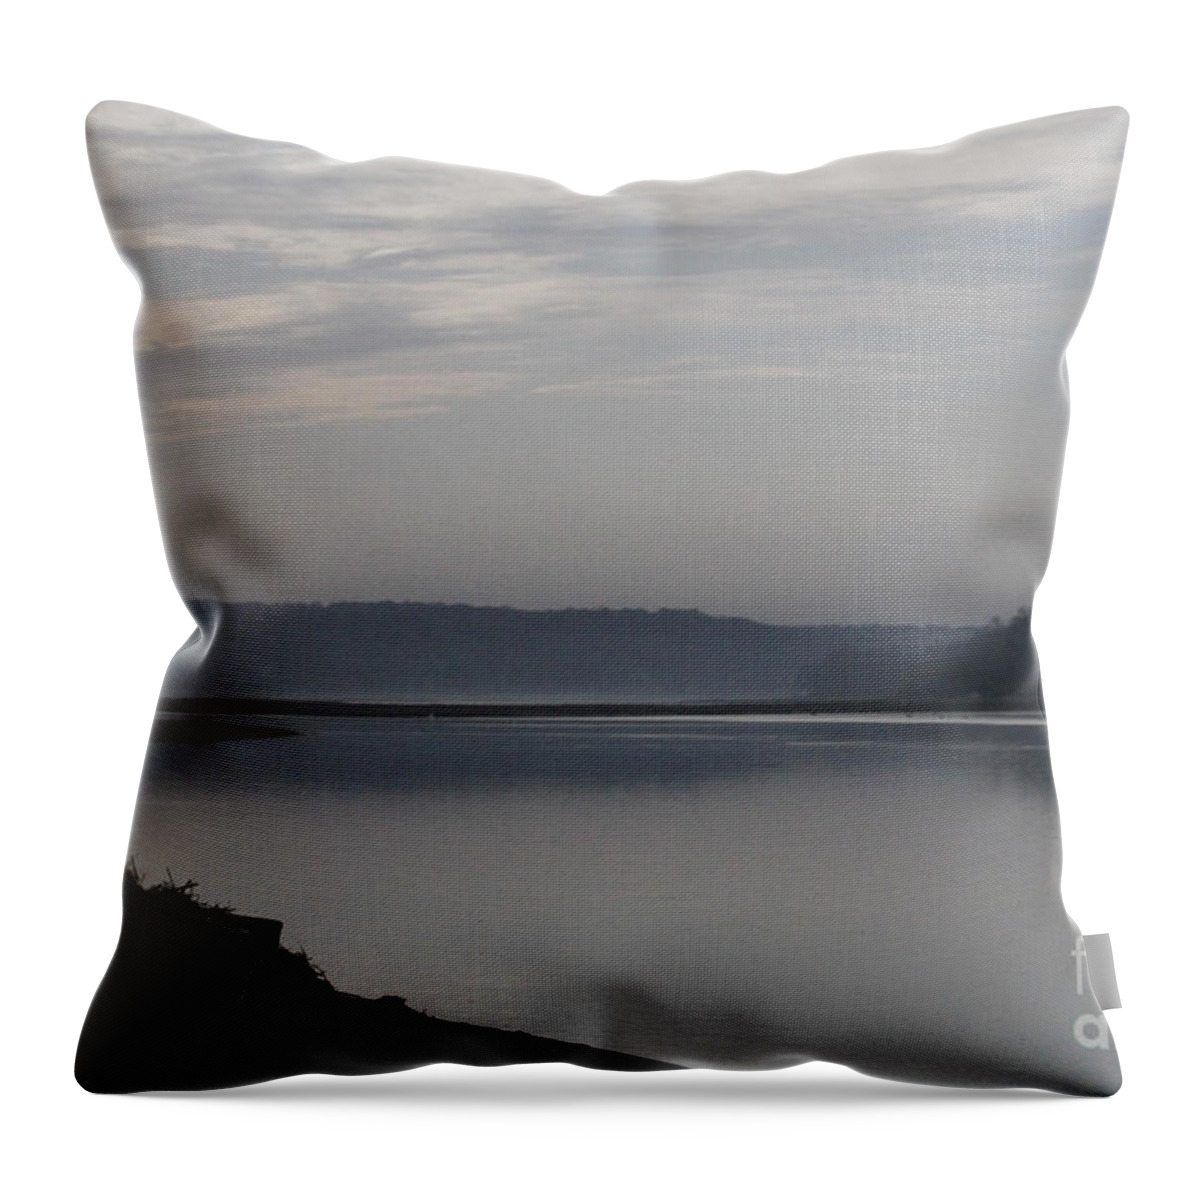 Landscape Throw Pillow featuring the digital art Serenity by Jack Ader